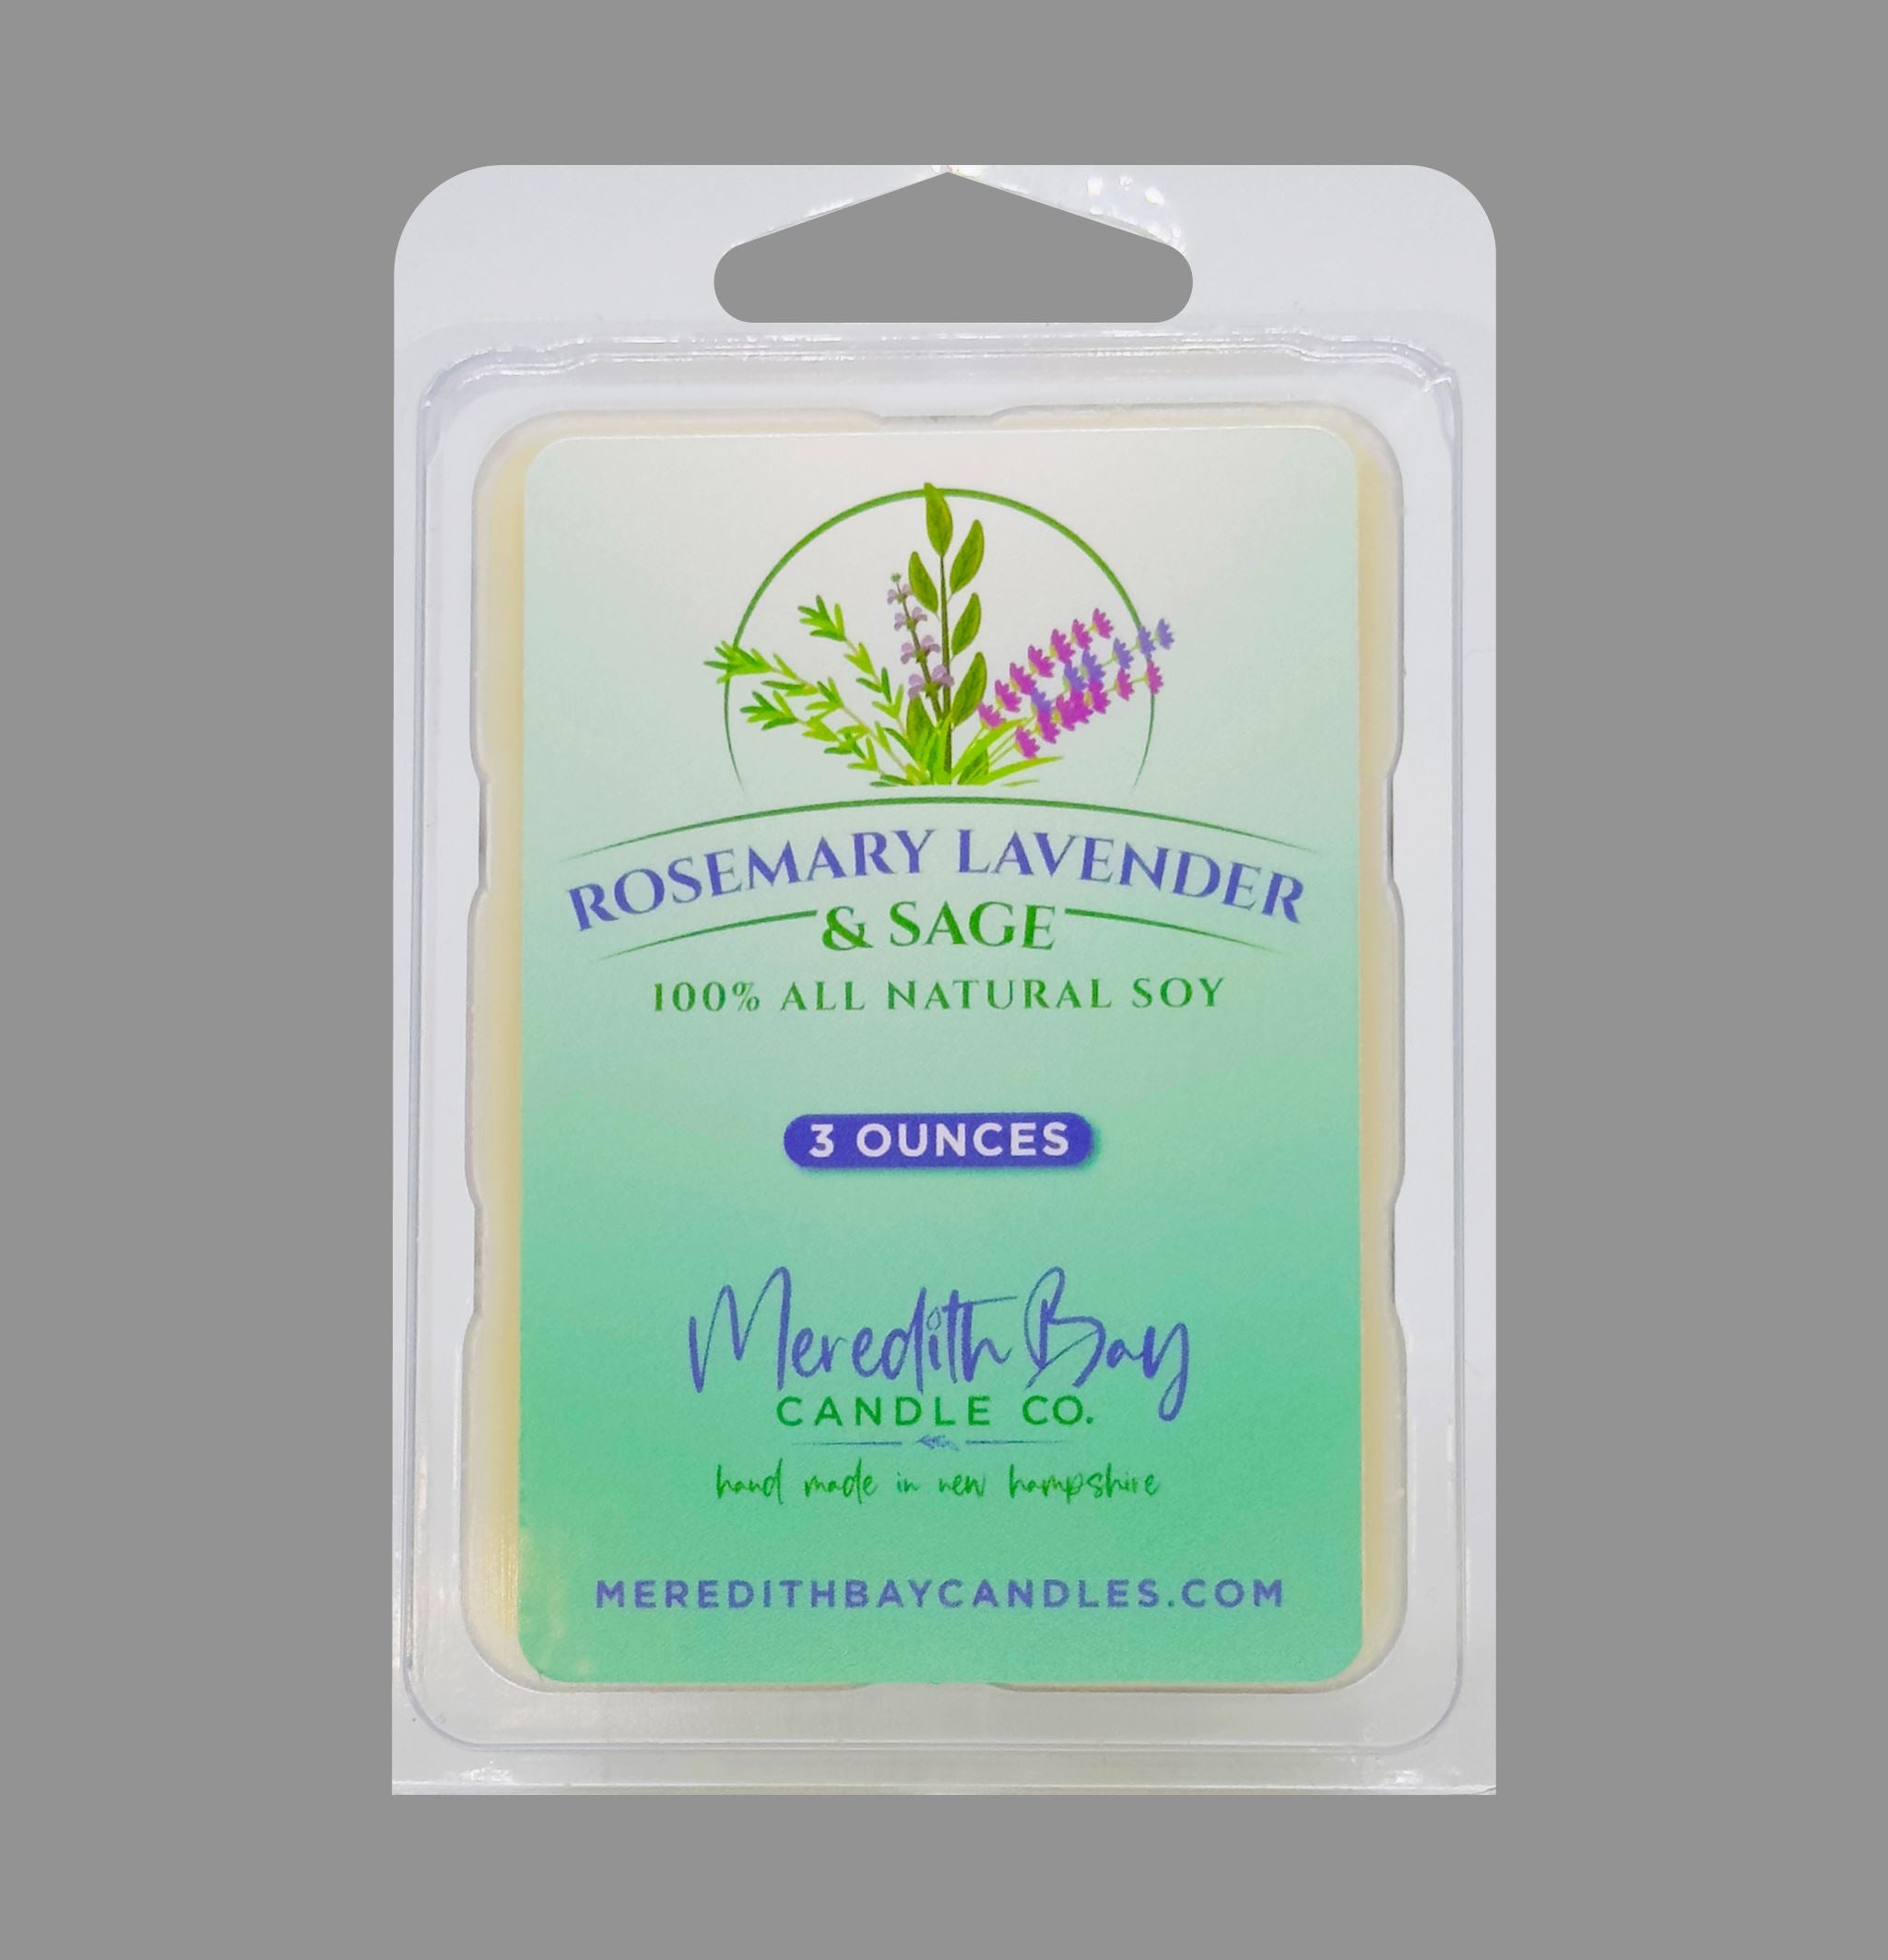 Rosemary, Lavender & Sage Wax Melt Meredith Bay Candle Co 